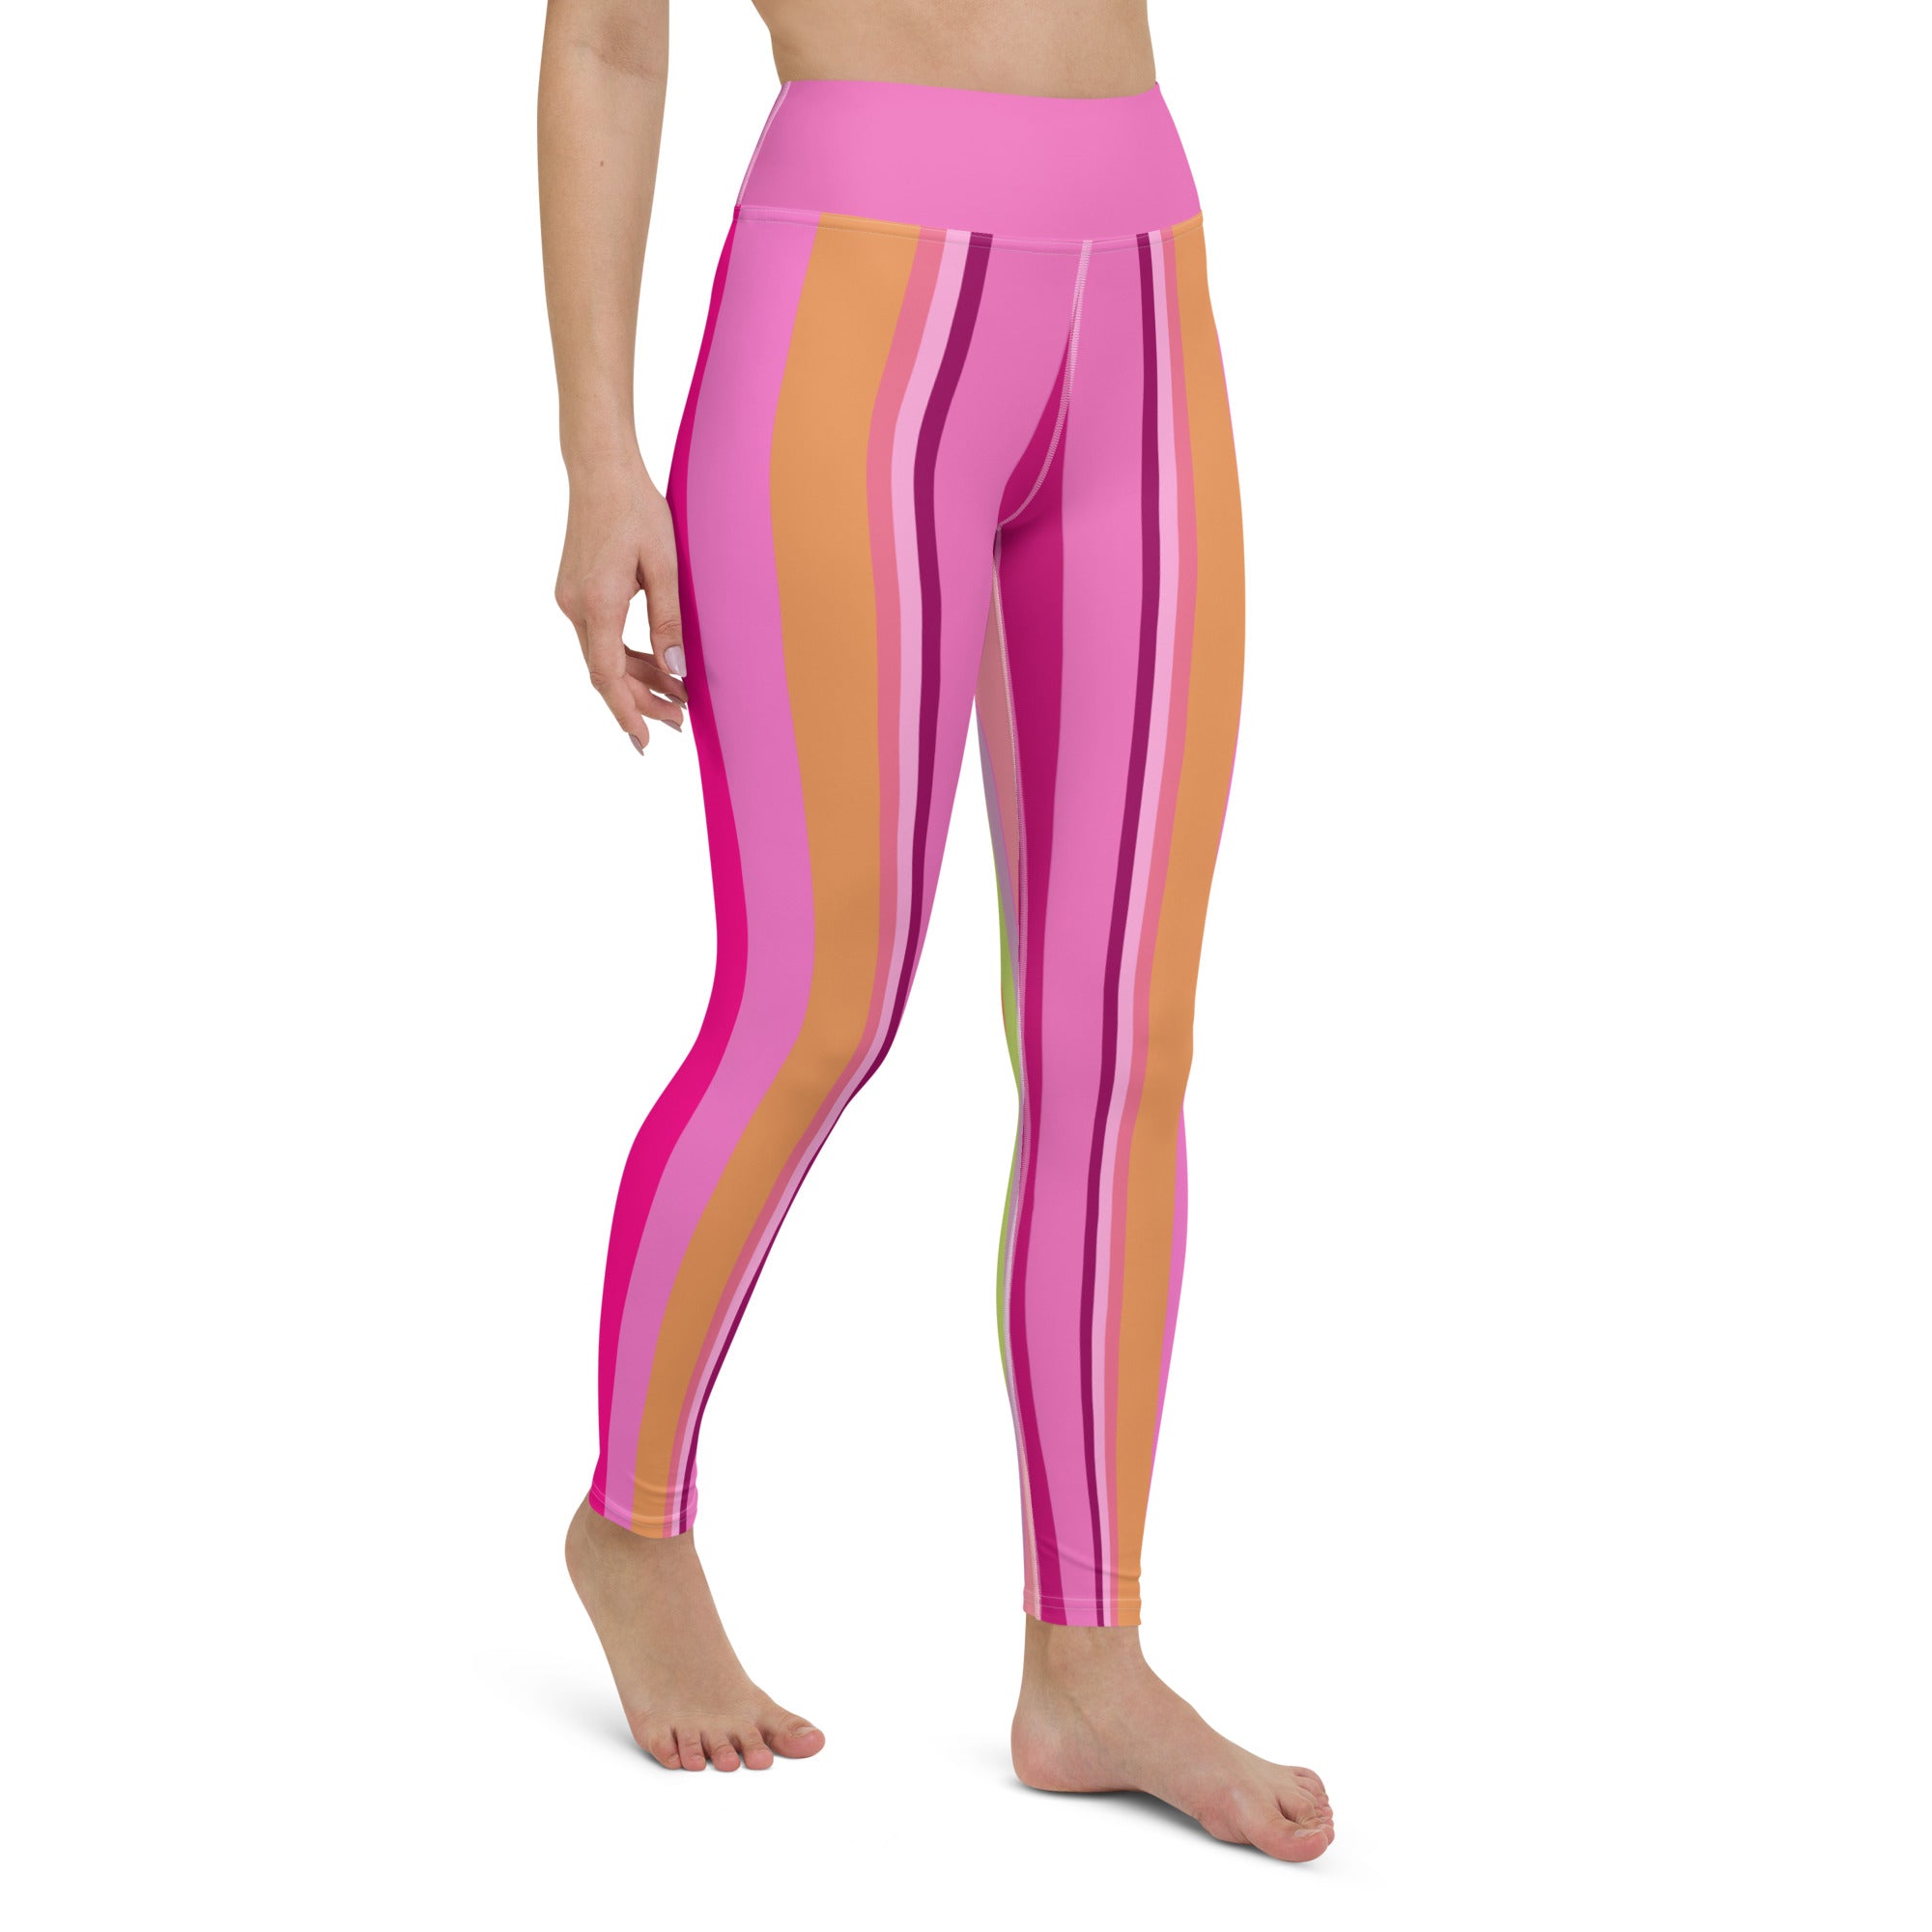 Kaleidoscopic Bliss Yoga Leggings featuring a burst of mesmerizing colors for an uplifting yoga experience.